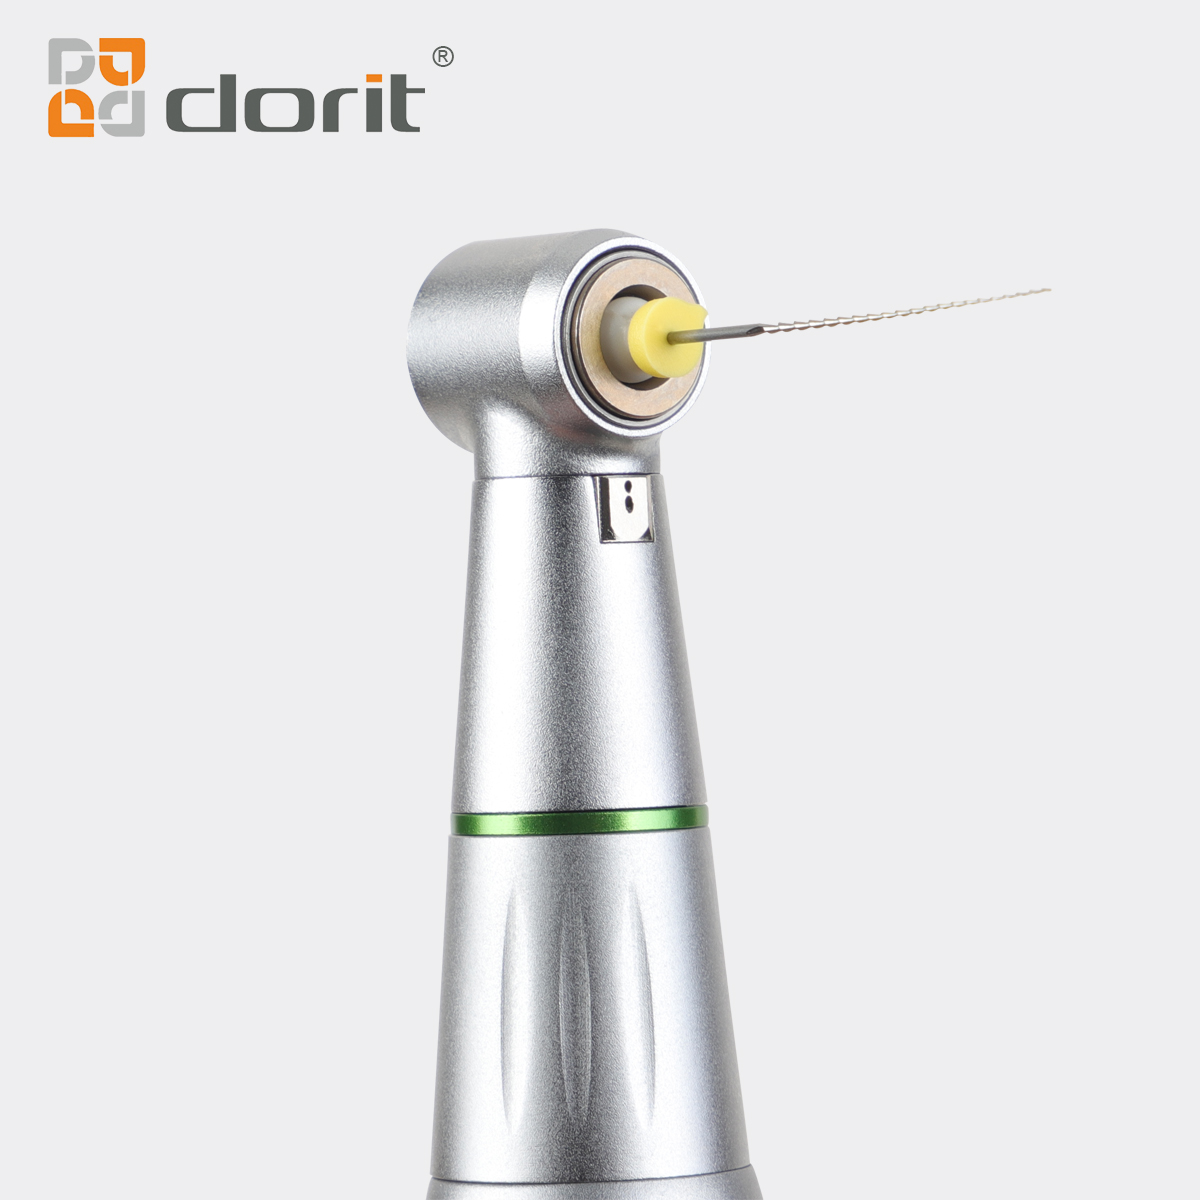 DORIT DR-N41 Reduction Contra Angle / Endo Contra Angle Reciprocating Rotating Low Speed Dental Handpiece